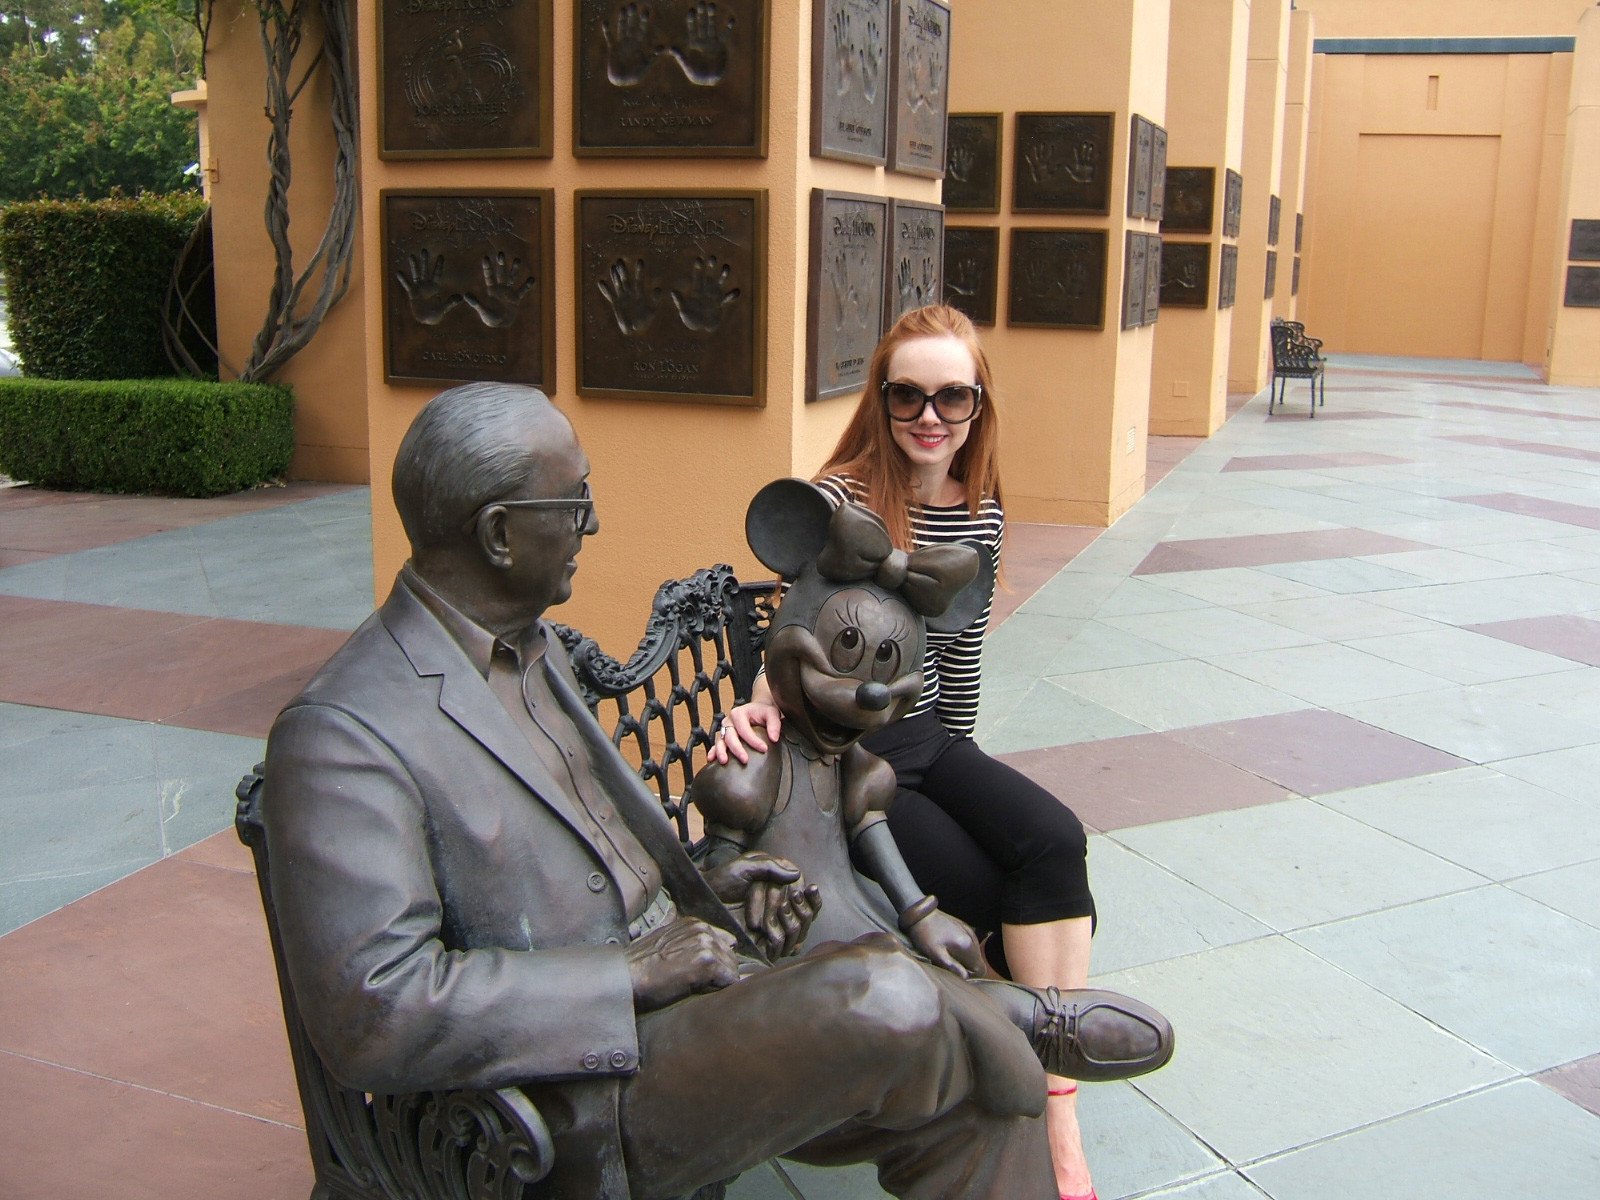 A private tour of the Disney Studios in Los Angeles, California